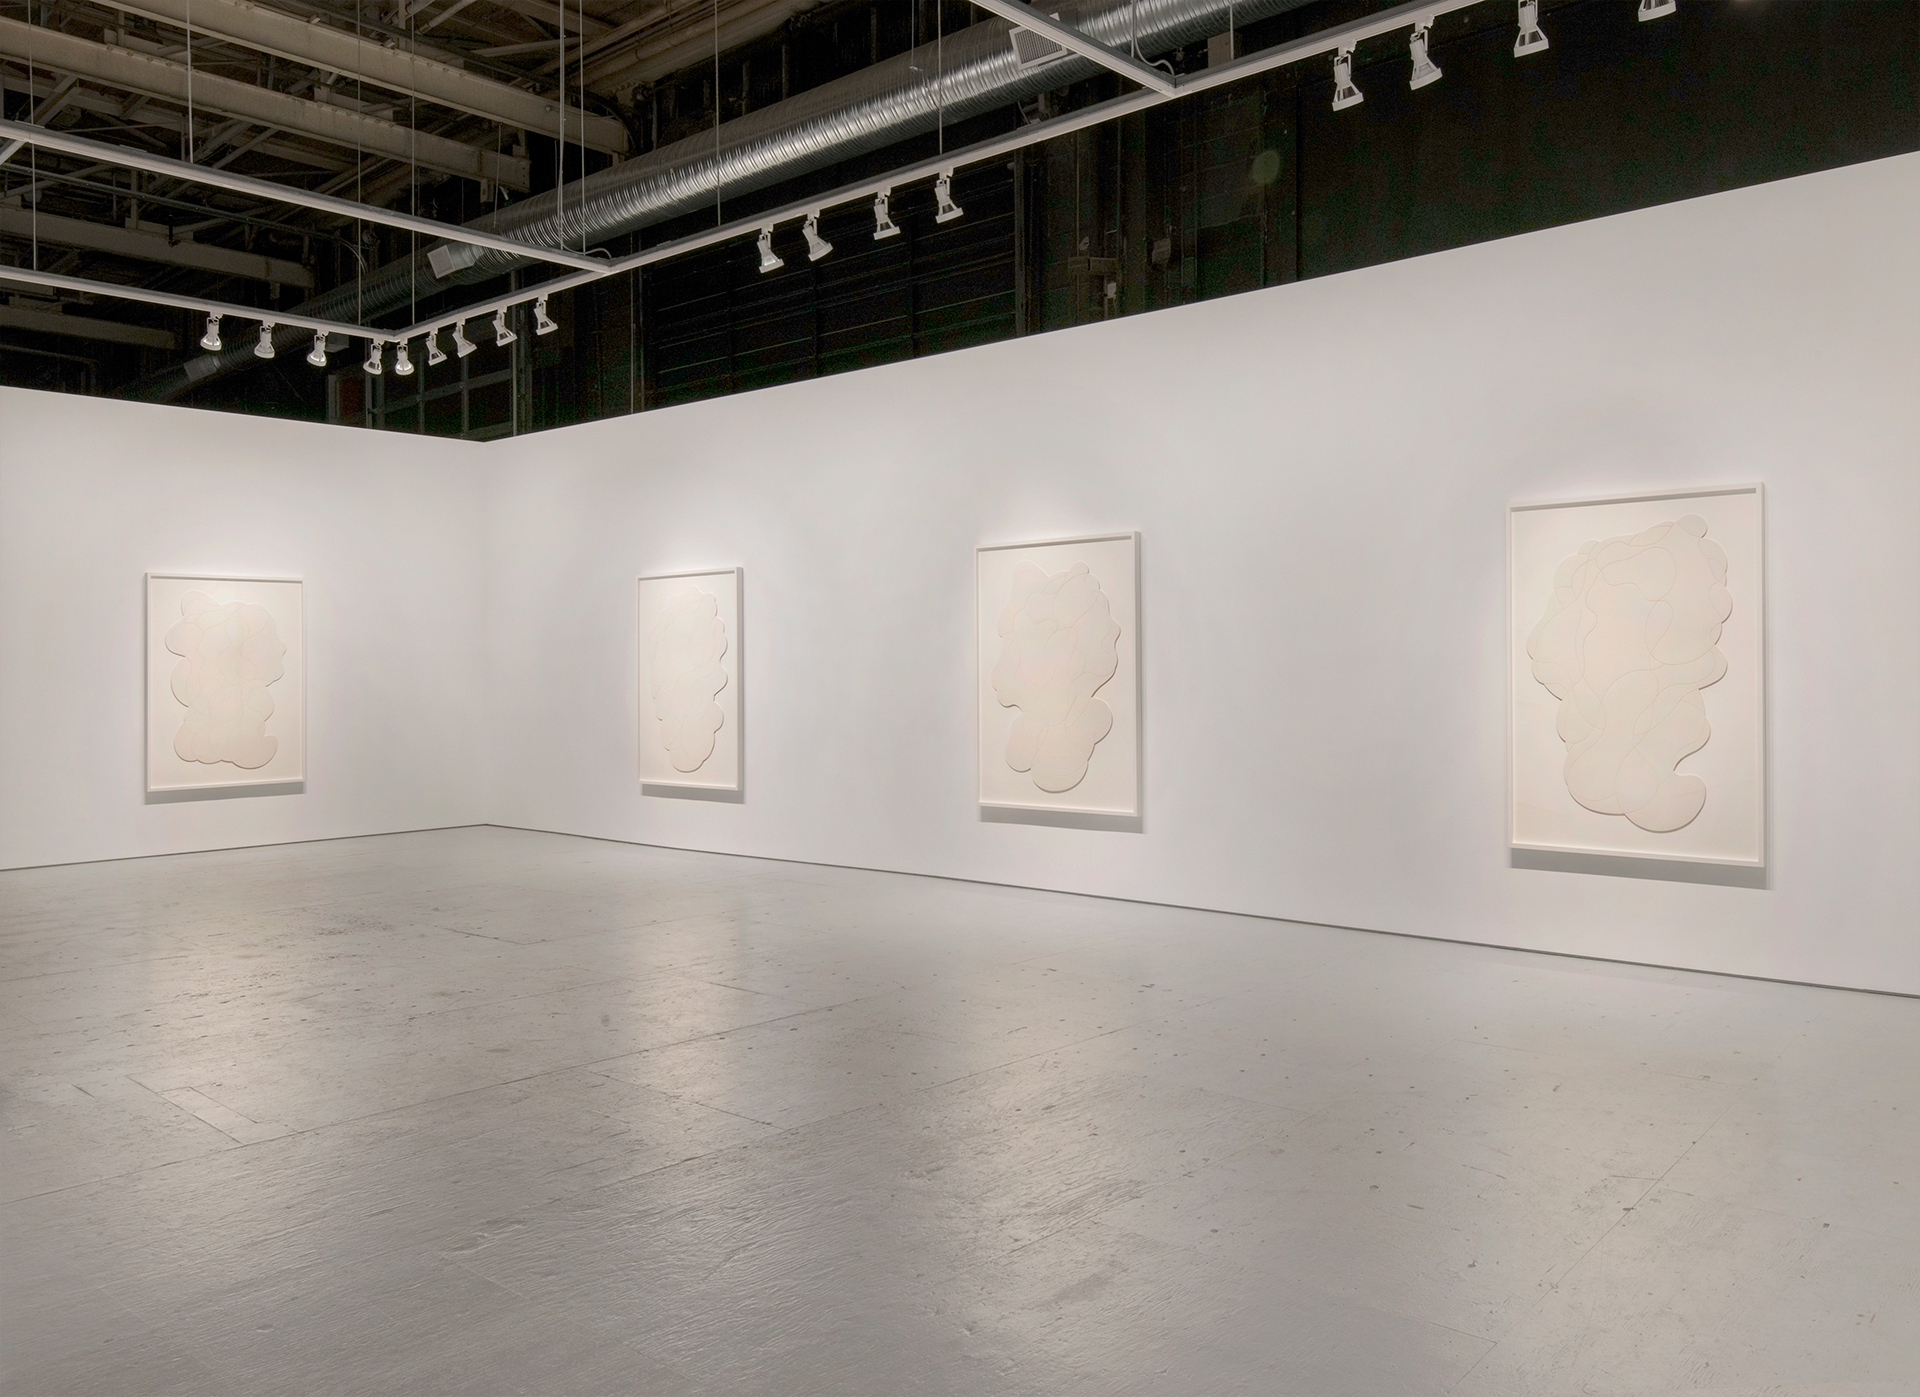   'Stone Drawings',  Exhibition, Equinox Gallery, 2014 